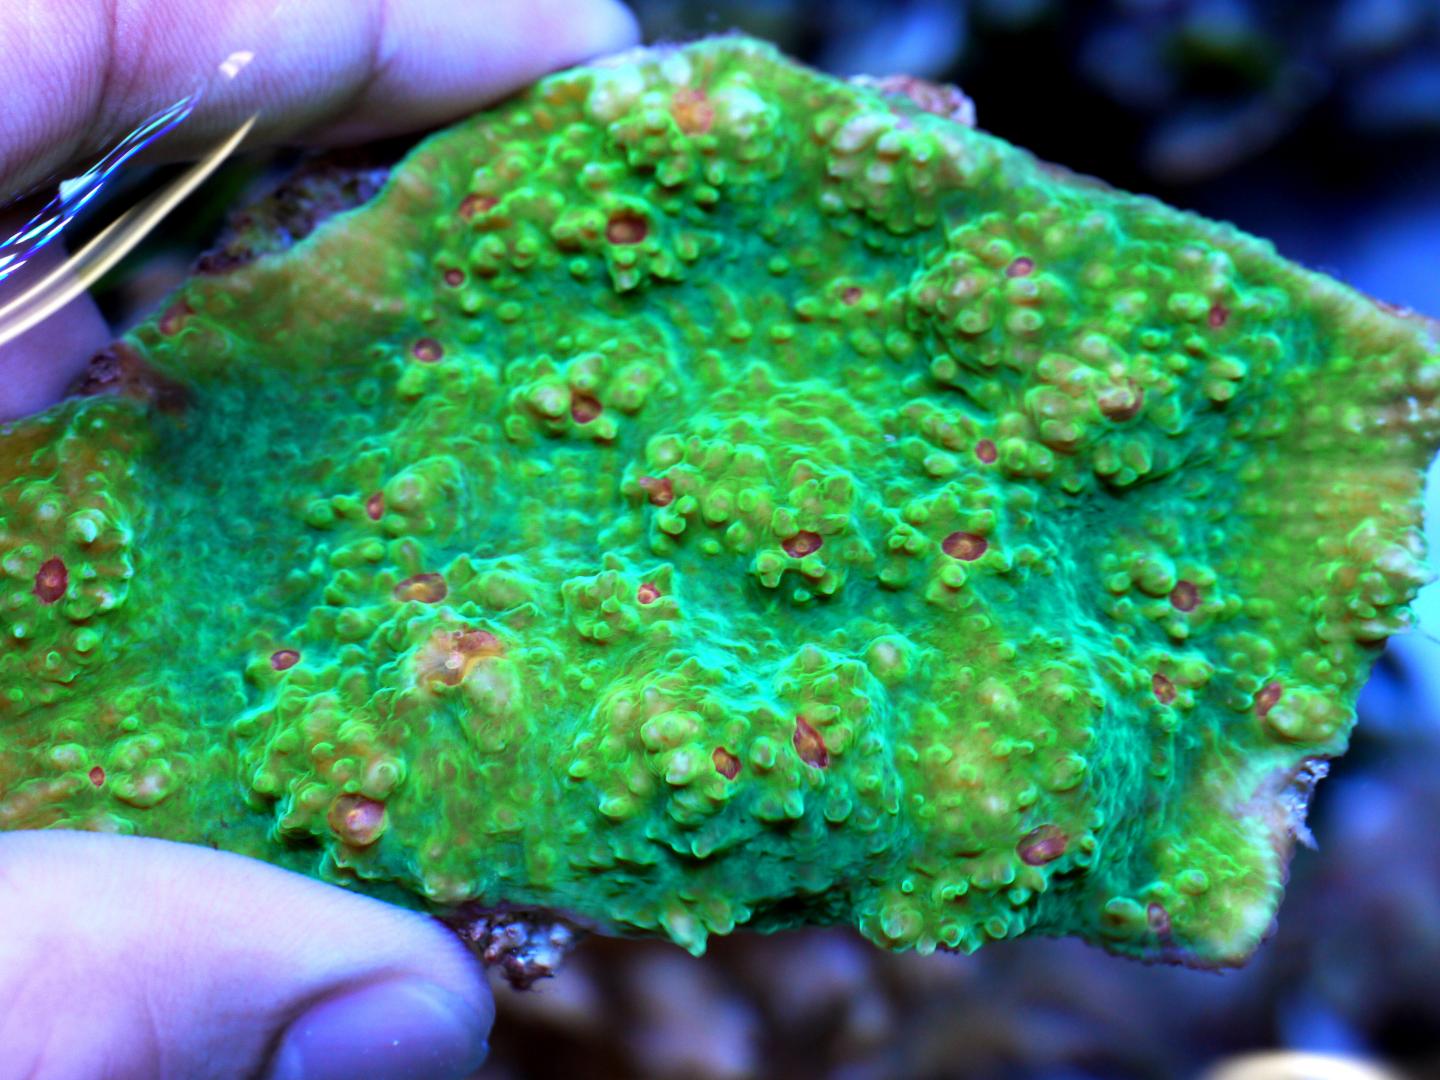 The Green Fluorescence Emitted by Corals